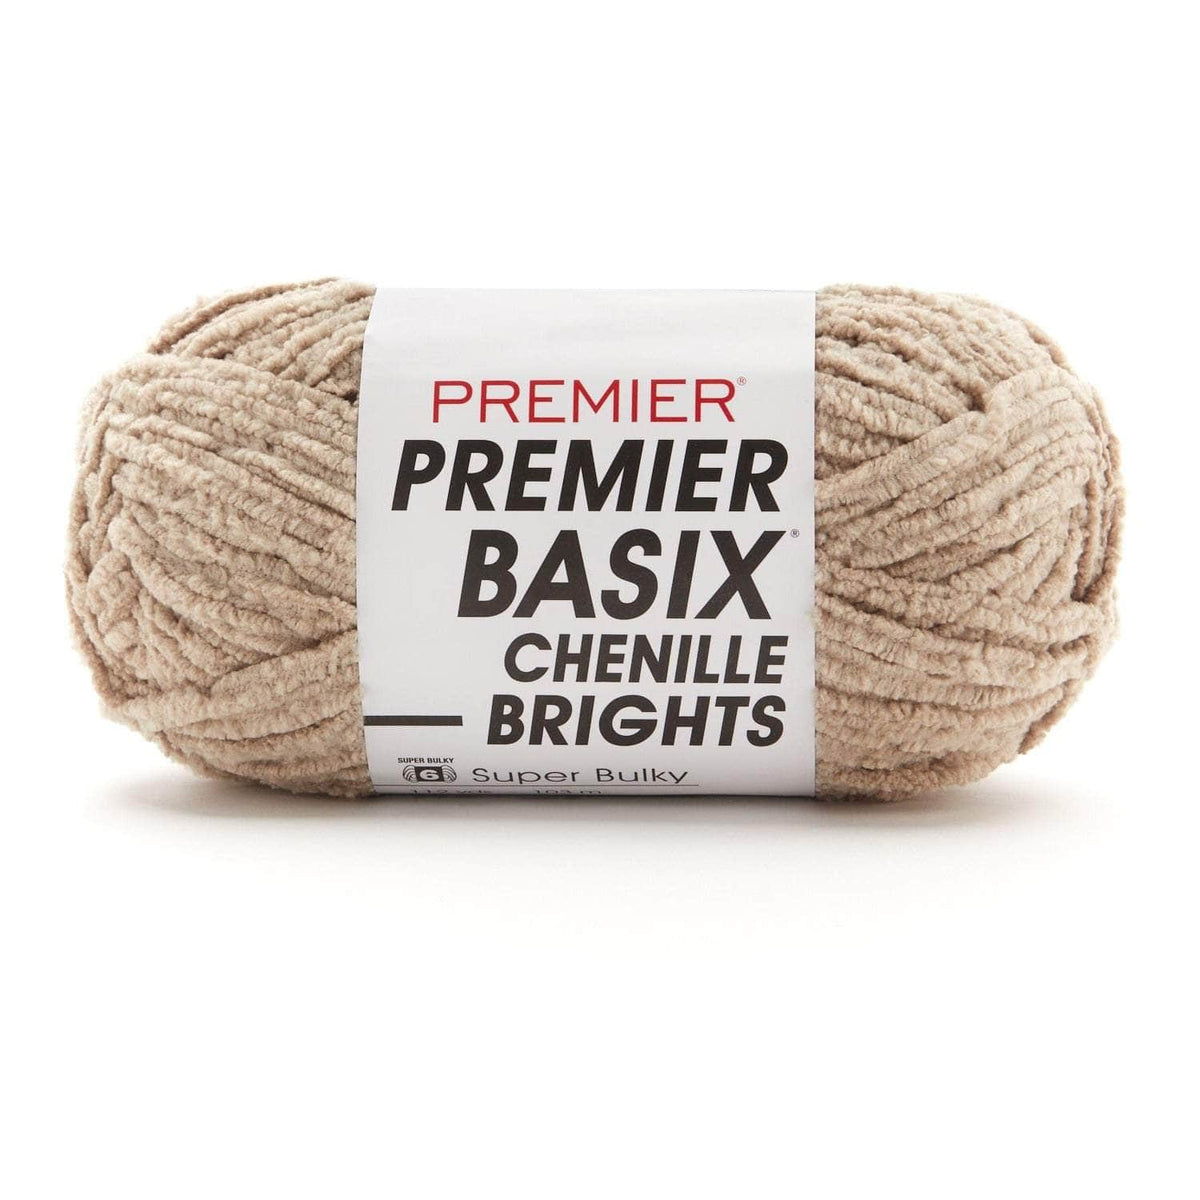 Premier Yarns Basix Chenille Brights Yarn - 5.3 Oz - #6 Super Bulky Weight  - 3 Pack Bundle with Bella's Crafts Stitch Markers (White)